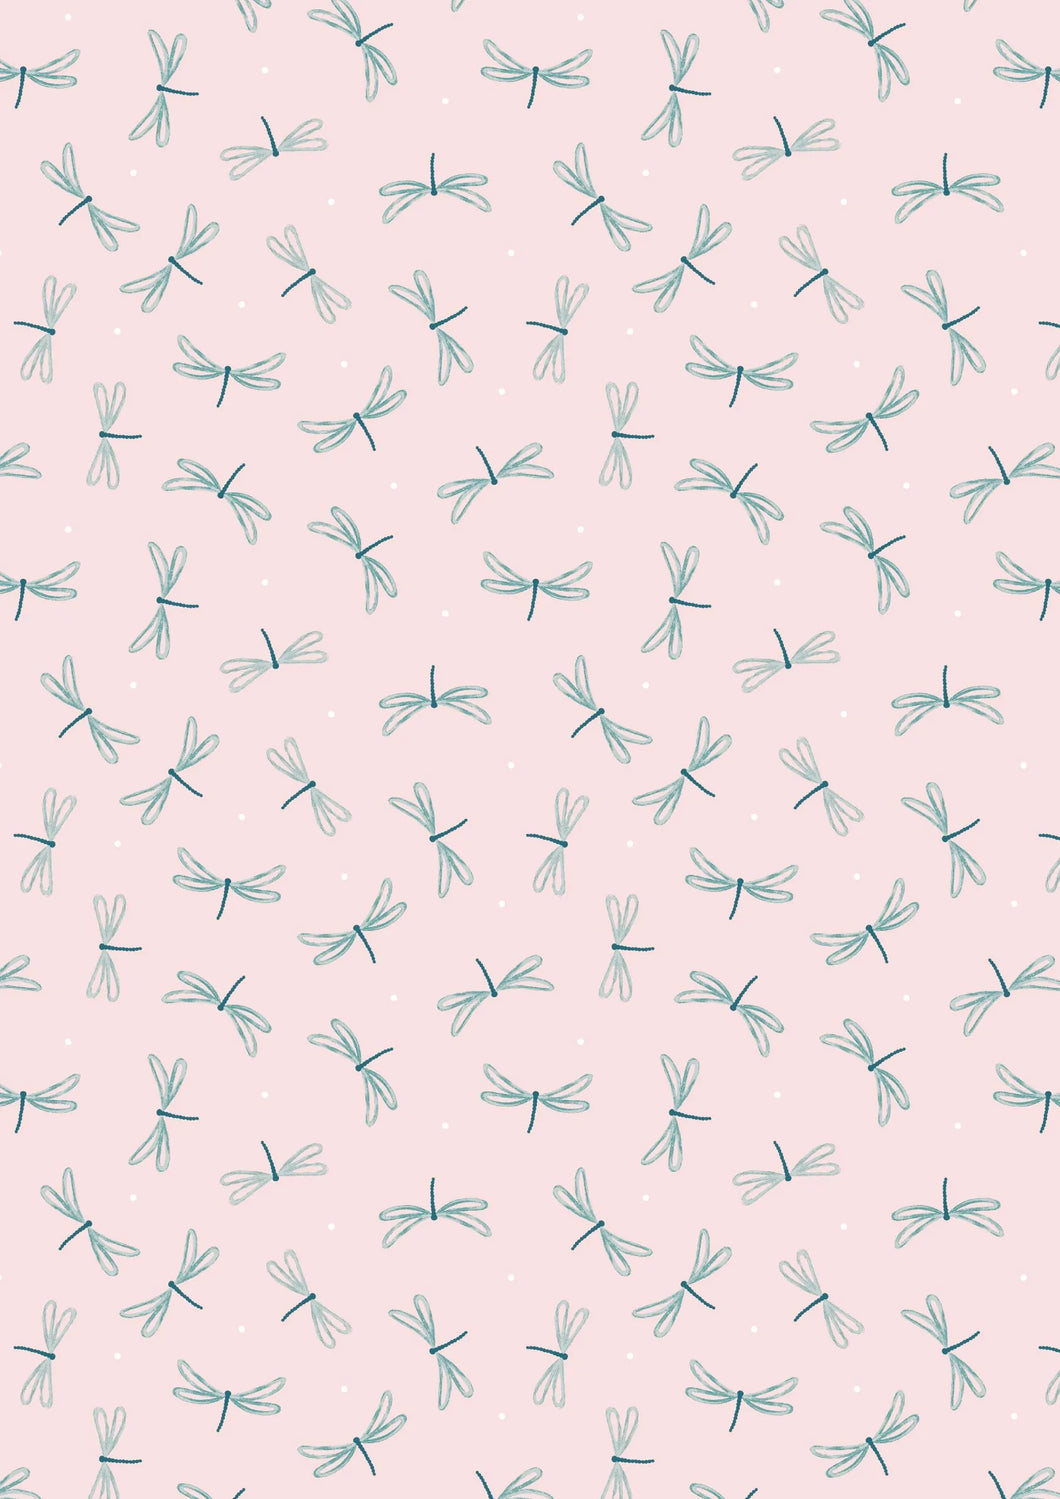 On The Lake - Lewis & Irene - Dragonfly in Palest Pink